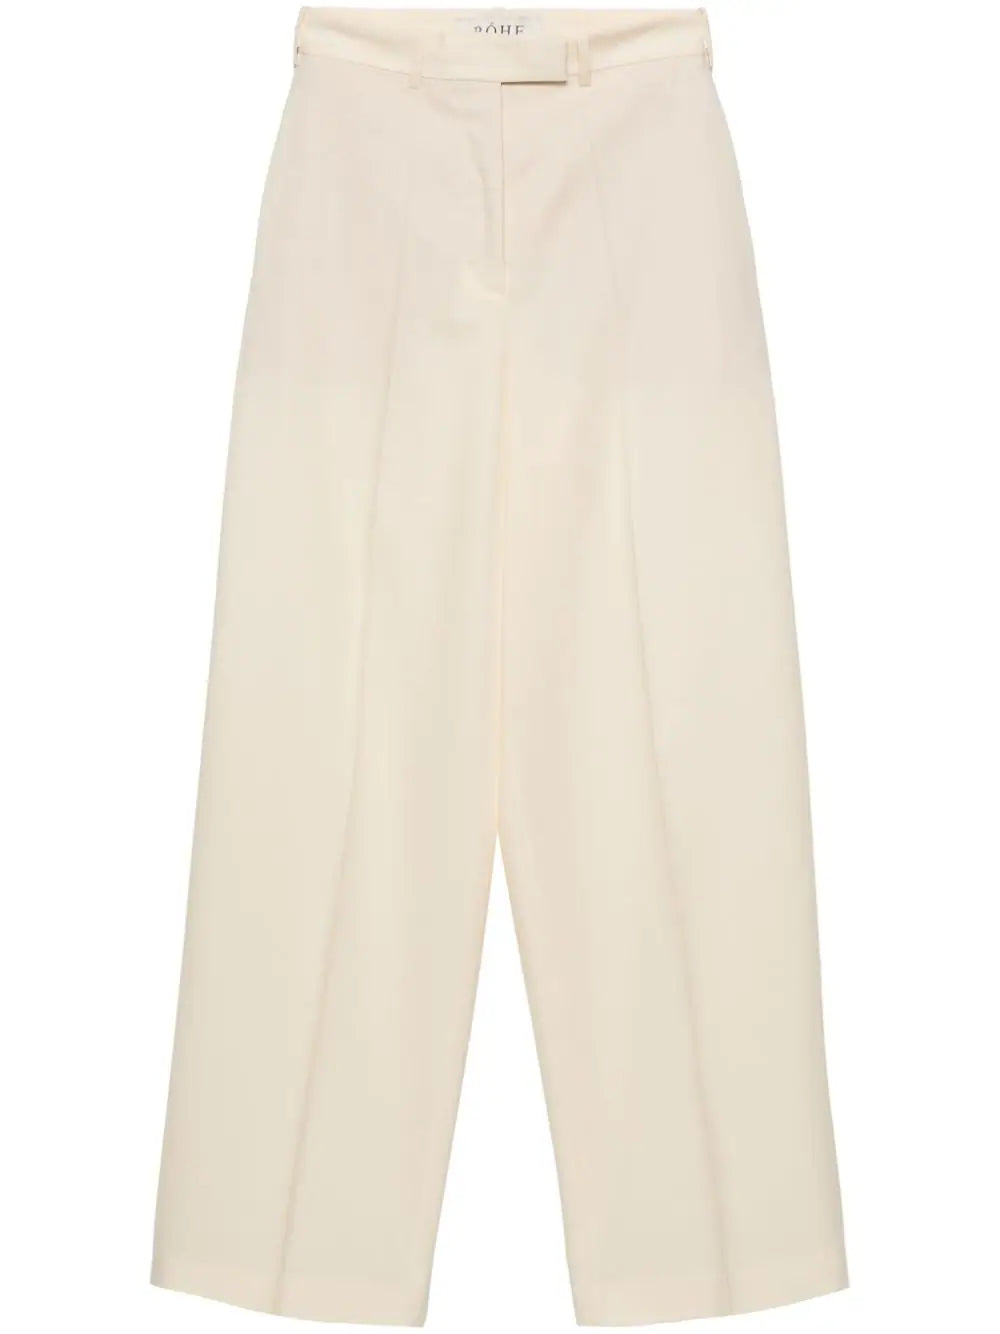 Wide Leg Trousers in Off-White